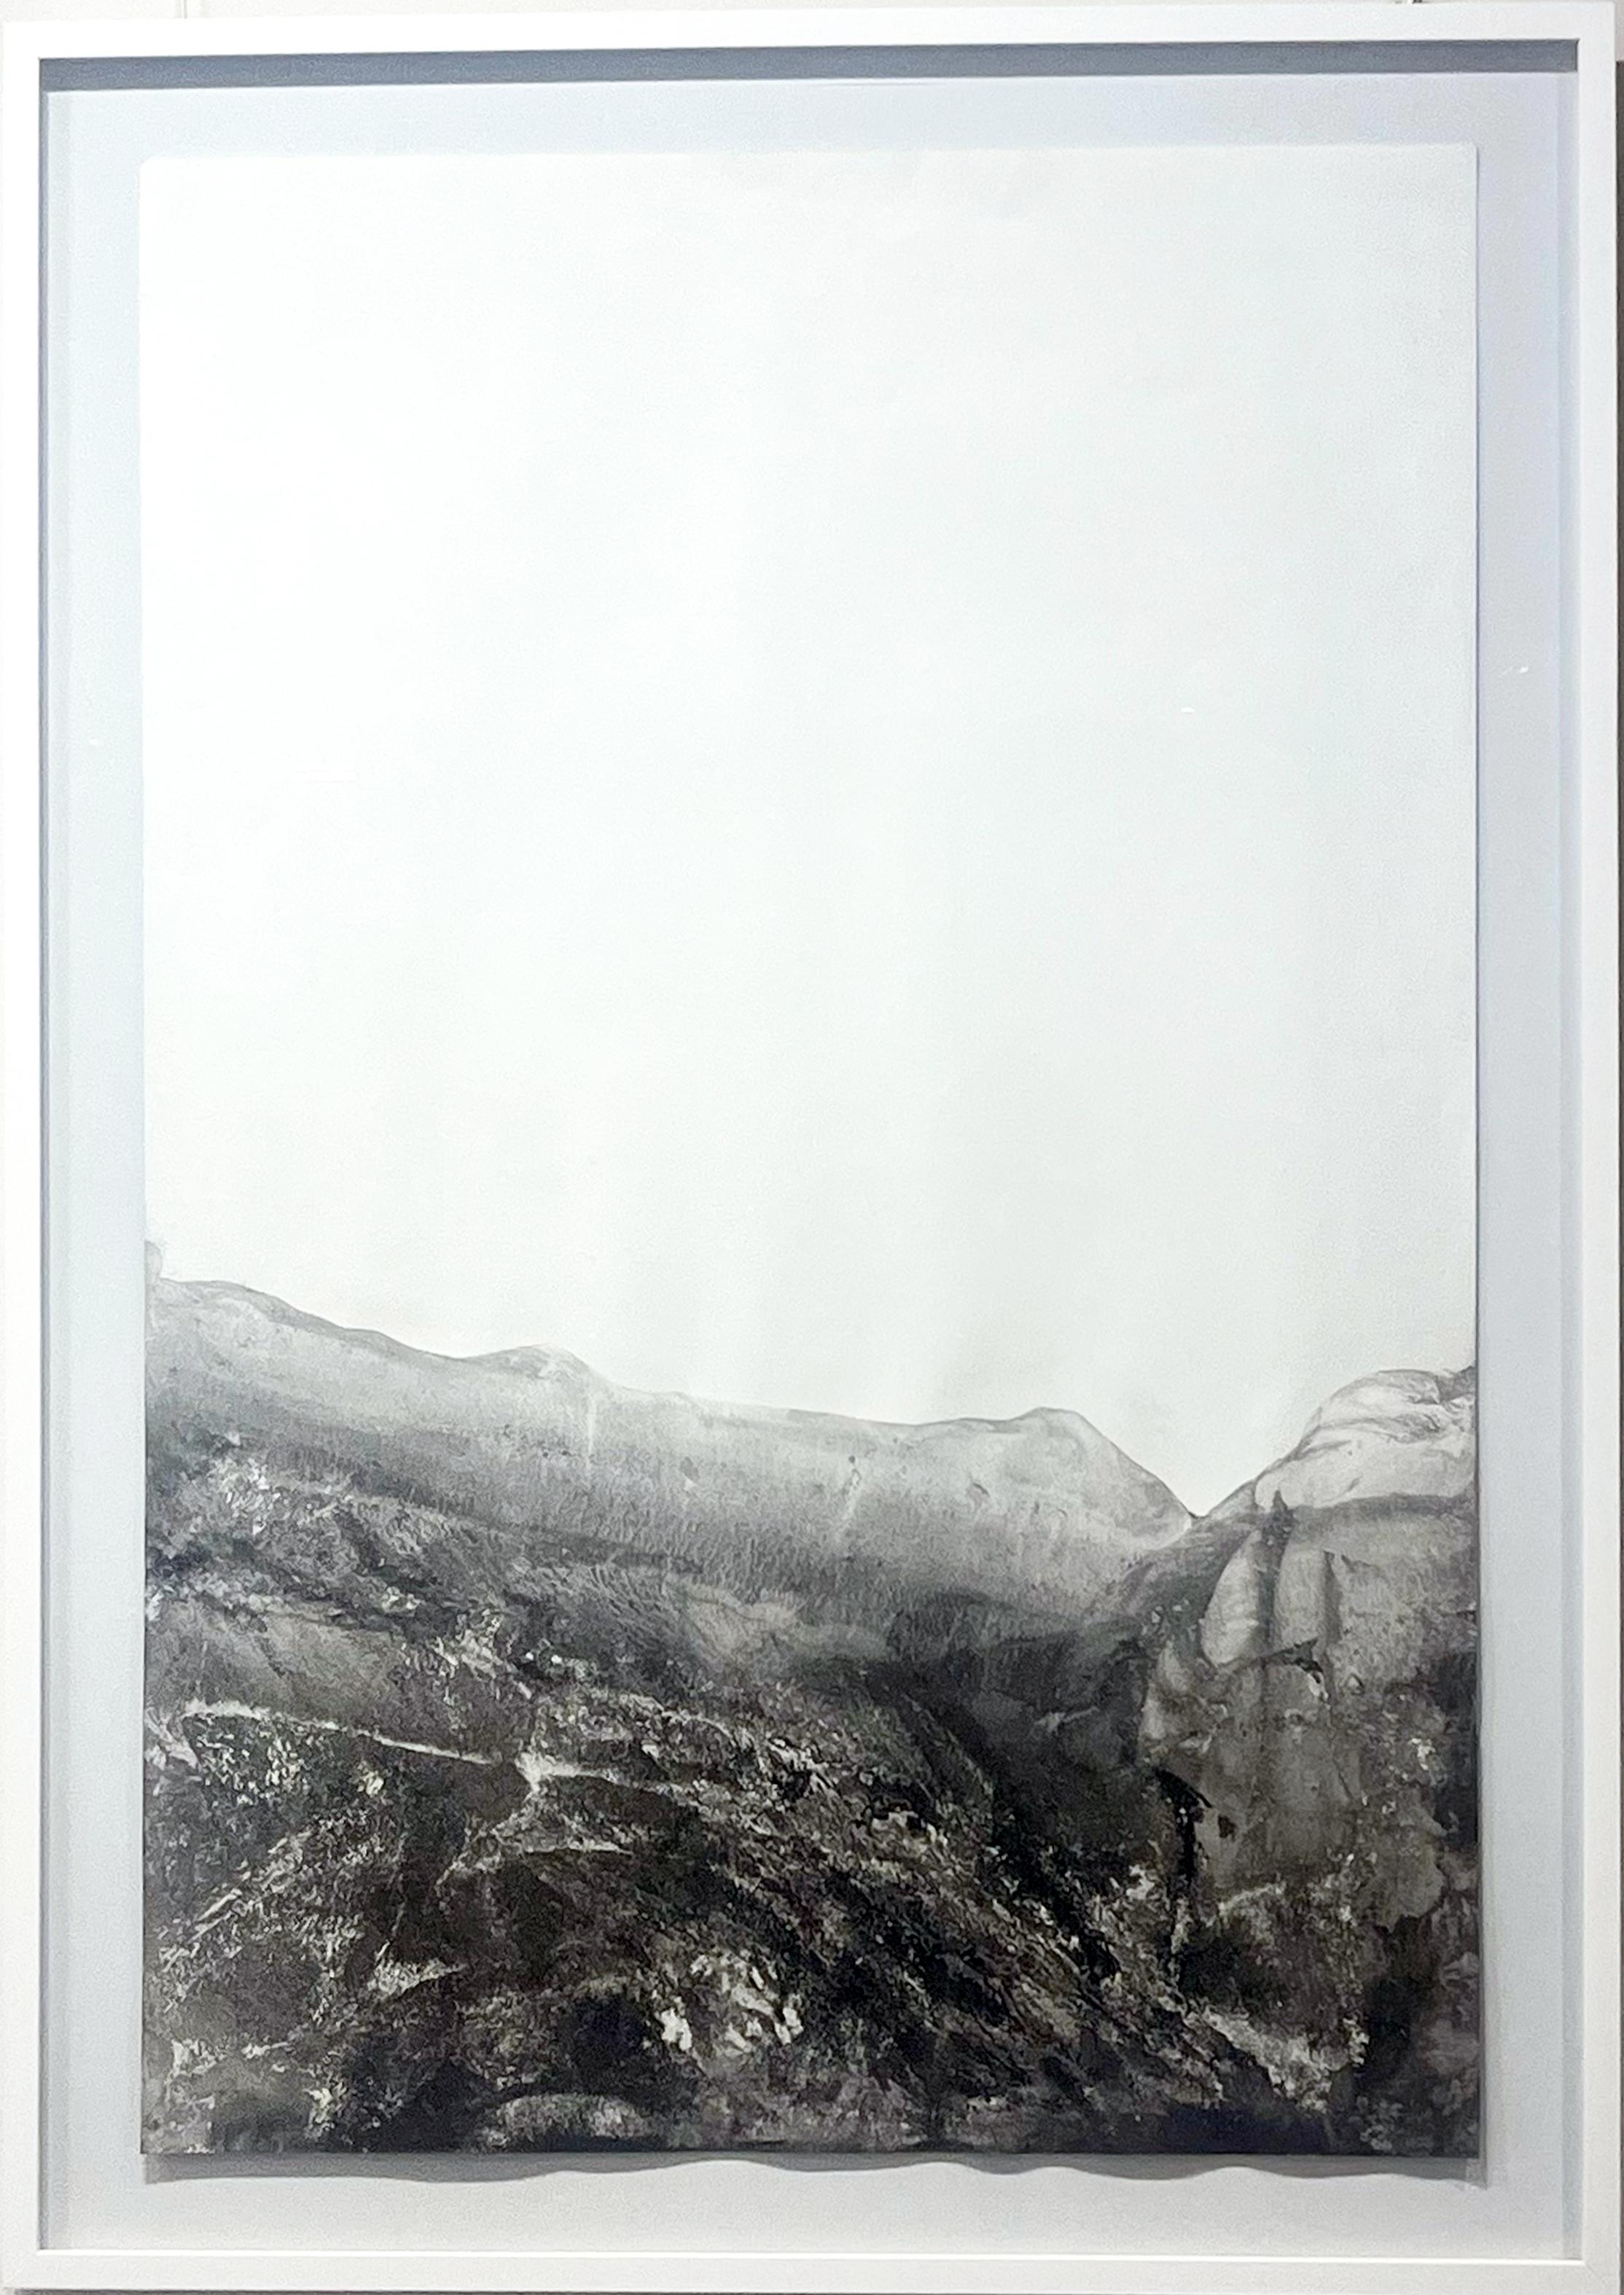 Landscape B/W
charcoal on paper (Canson paper 300 gr)
75x110cm
 framed SIZE
92x122cm

this painting is published in the personal exhibition catalogue
